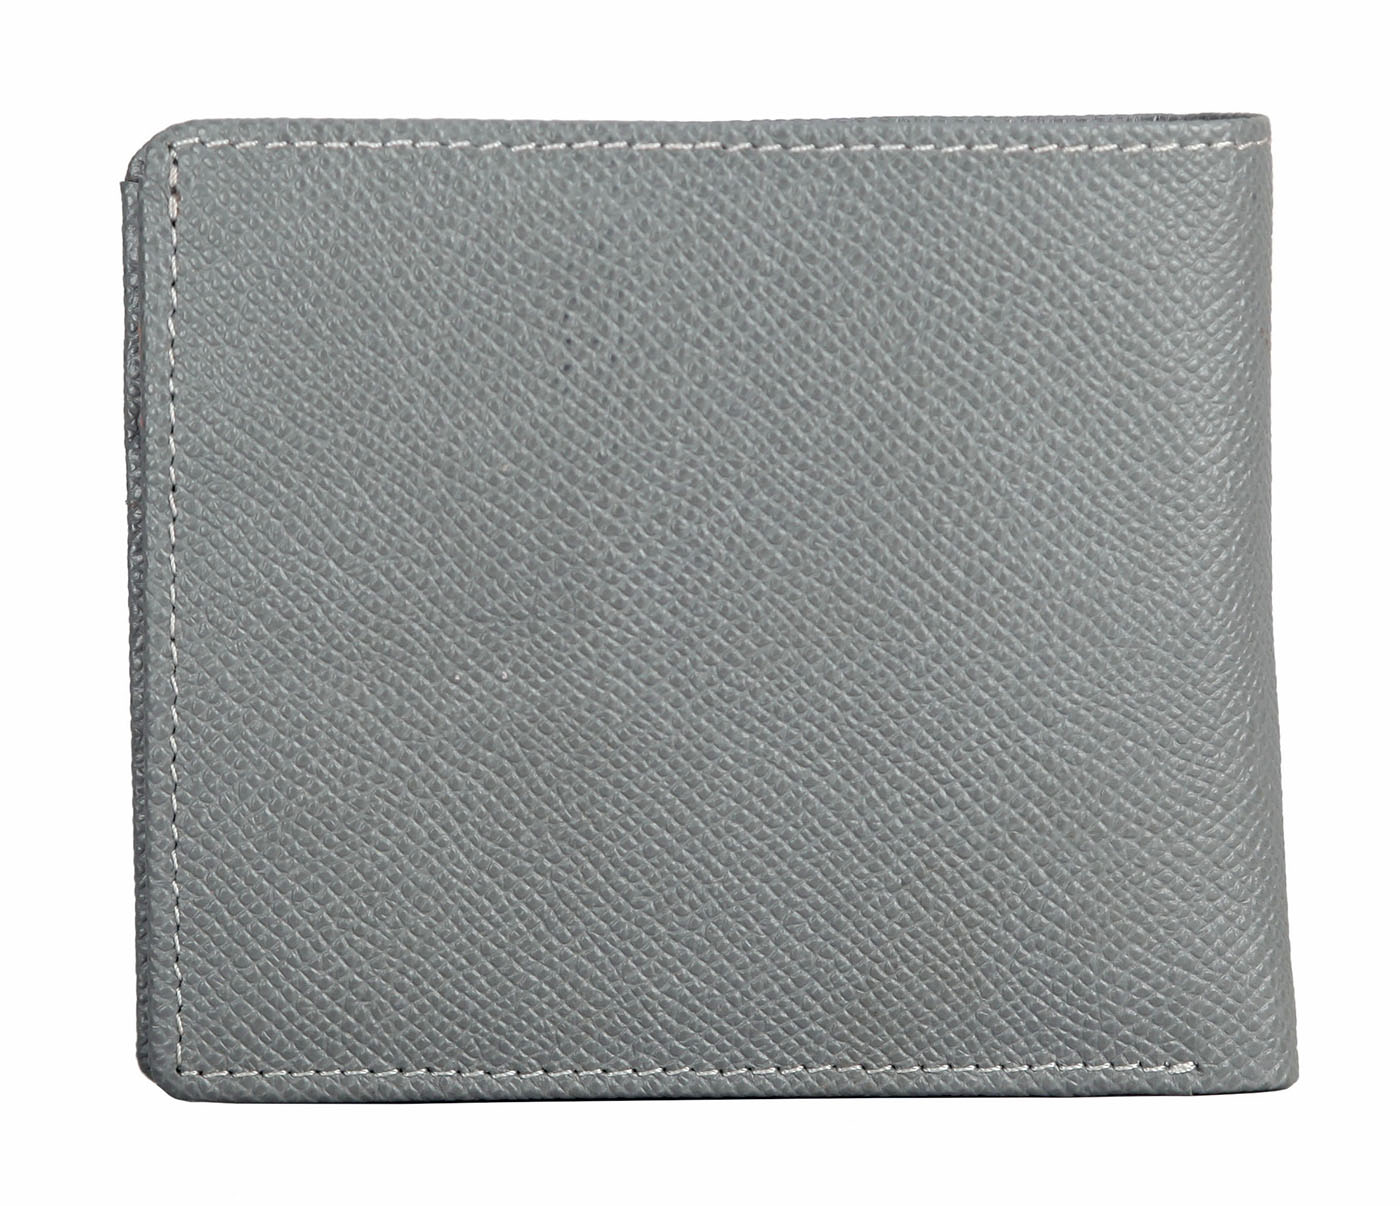 W310-Addler-Men's bifold wallet with coin pocket in Genuine Leather - Grey